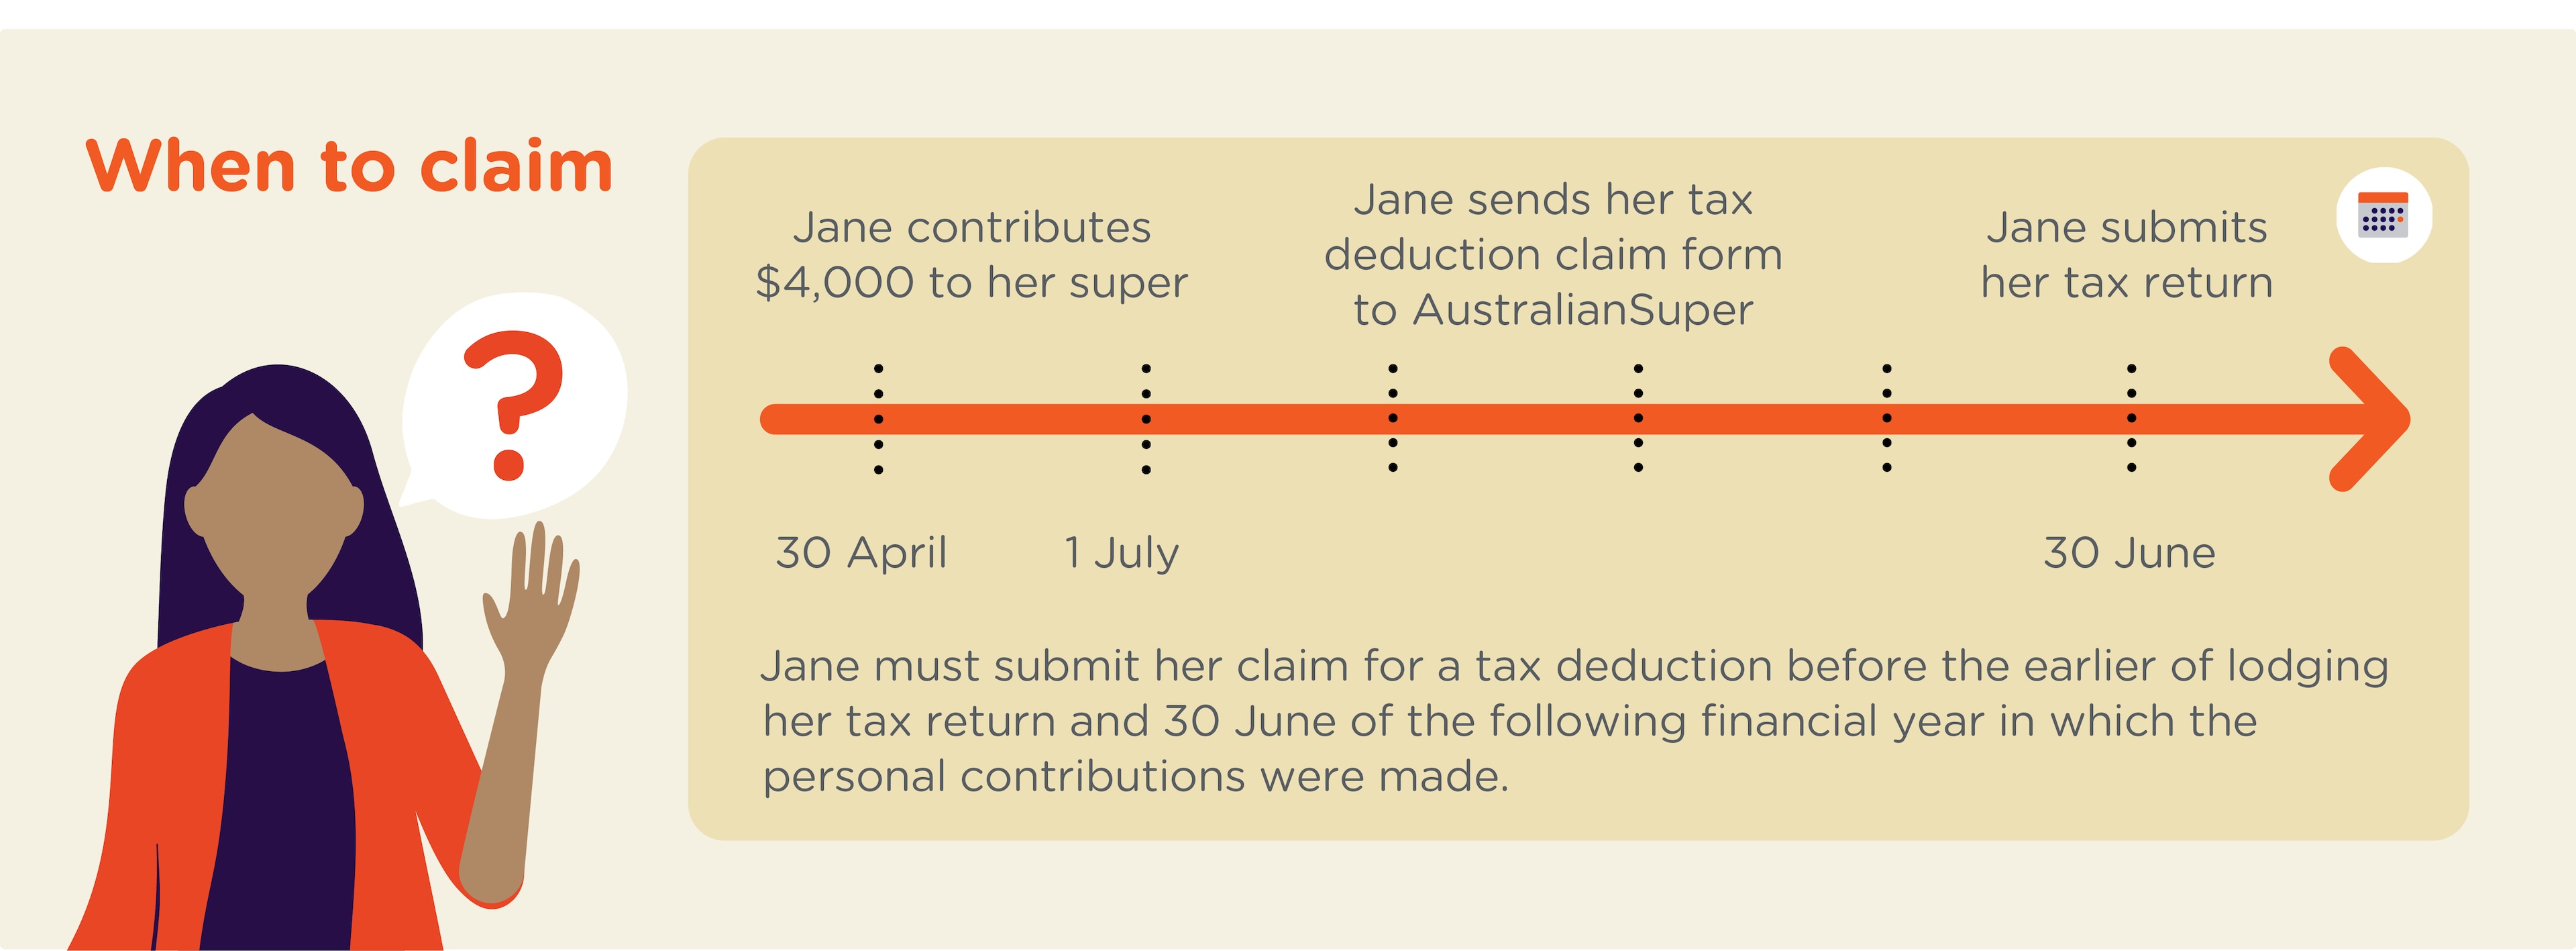 Jane contributes $4,000 to her super on 30 April. Jane mustsubmit her claim for a tax deduction before the earlier of lodging her tax return and 30 June of the following financial year in which the personal contributions were made. 